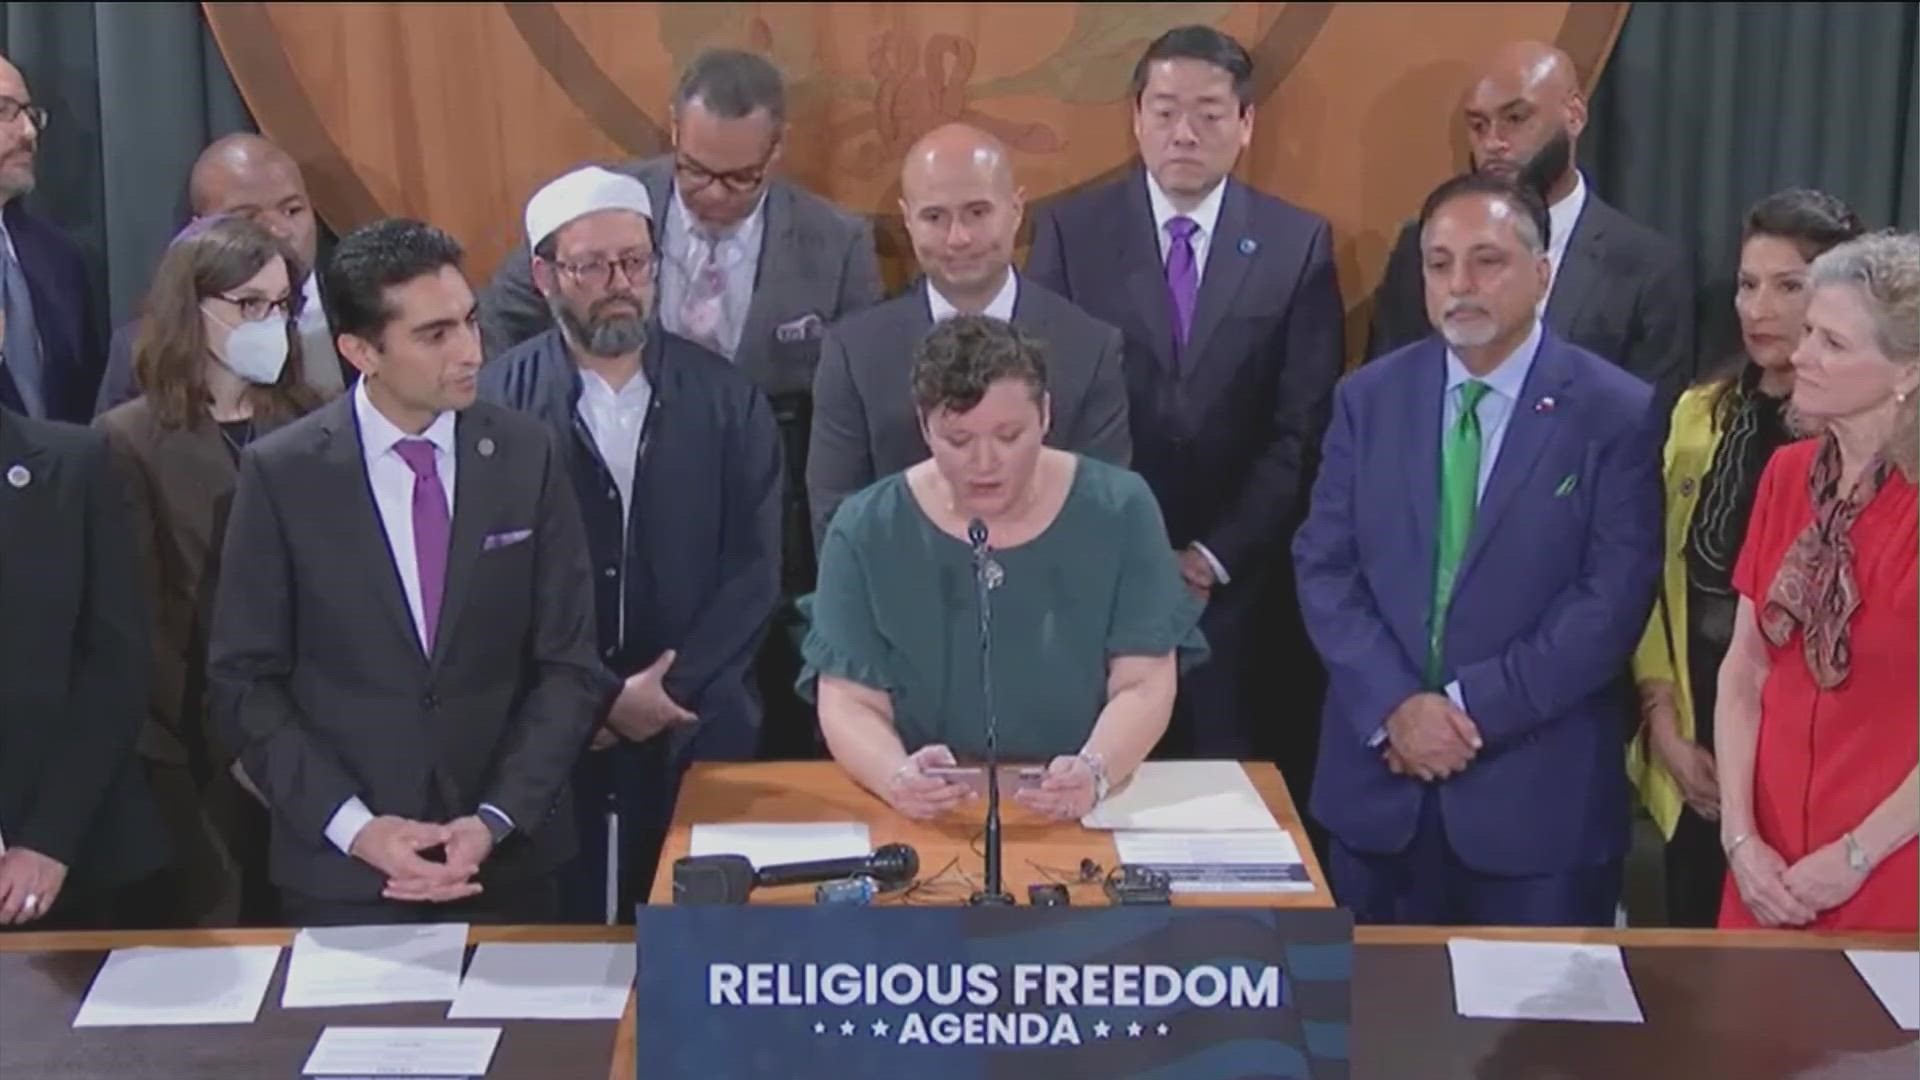 A group of bipartisan lawmakers of different faiths have something in common. They're supporting what they're calling the "Religious Freedom Agenda."